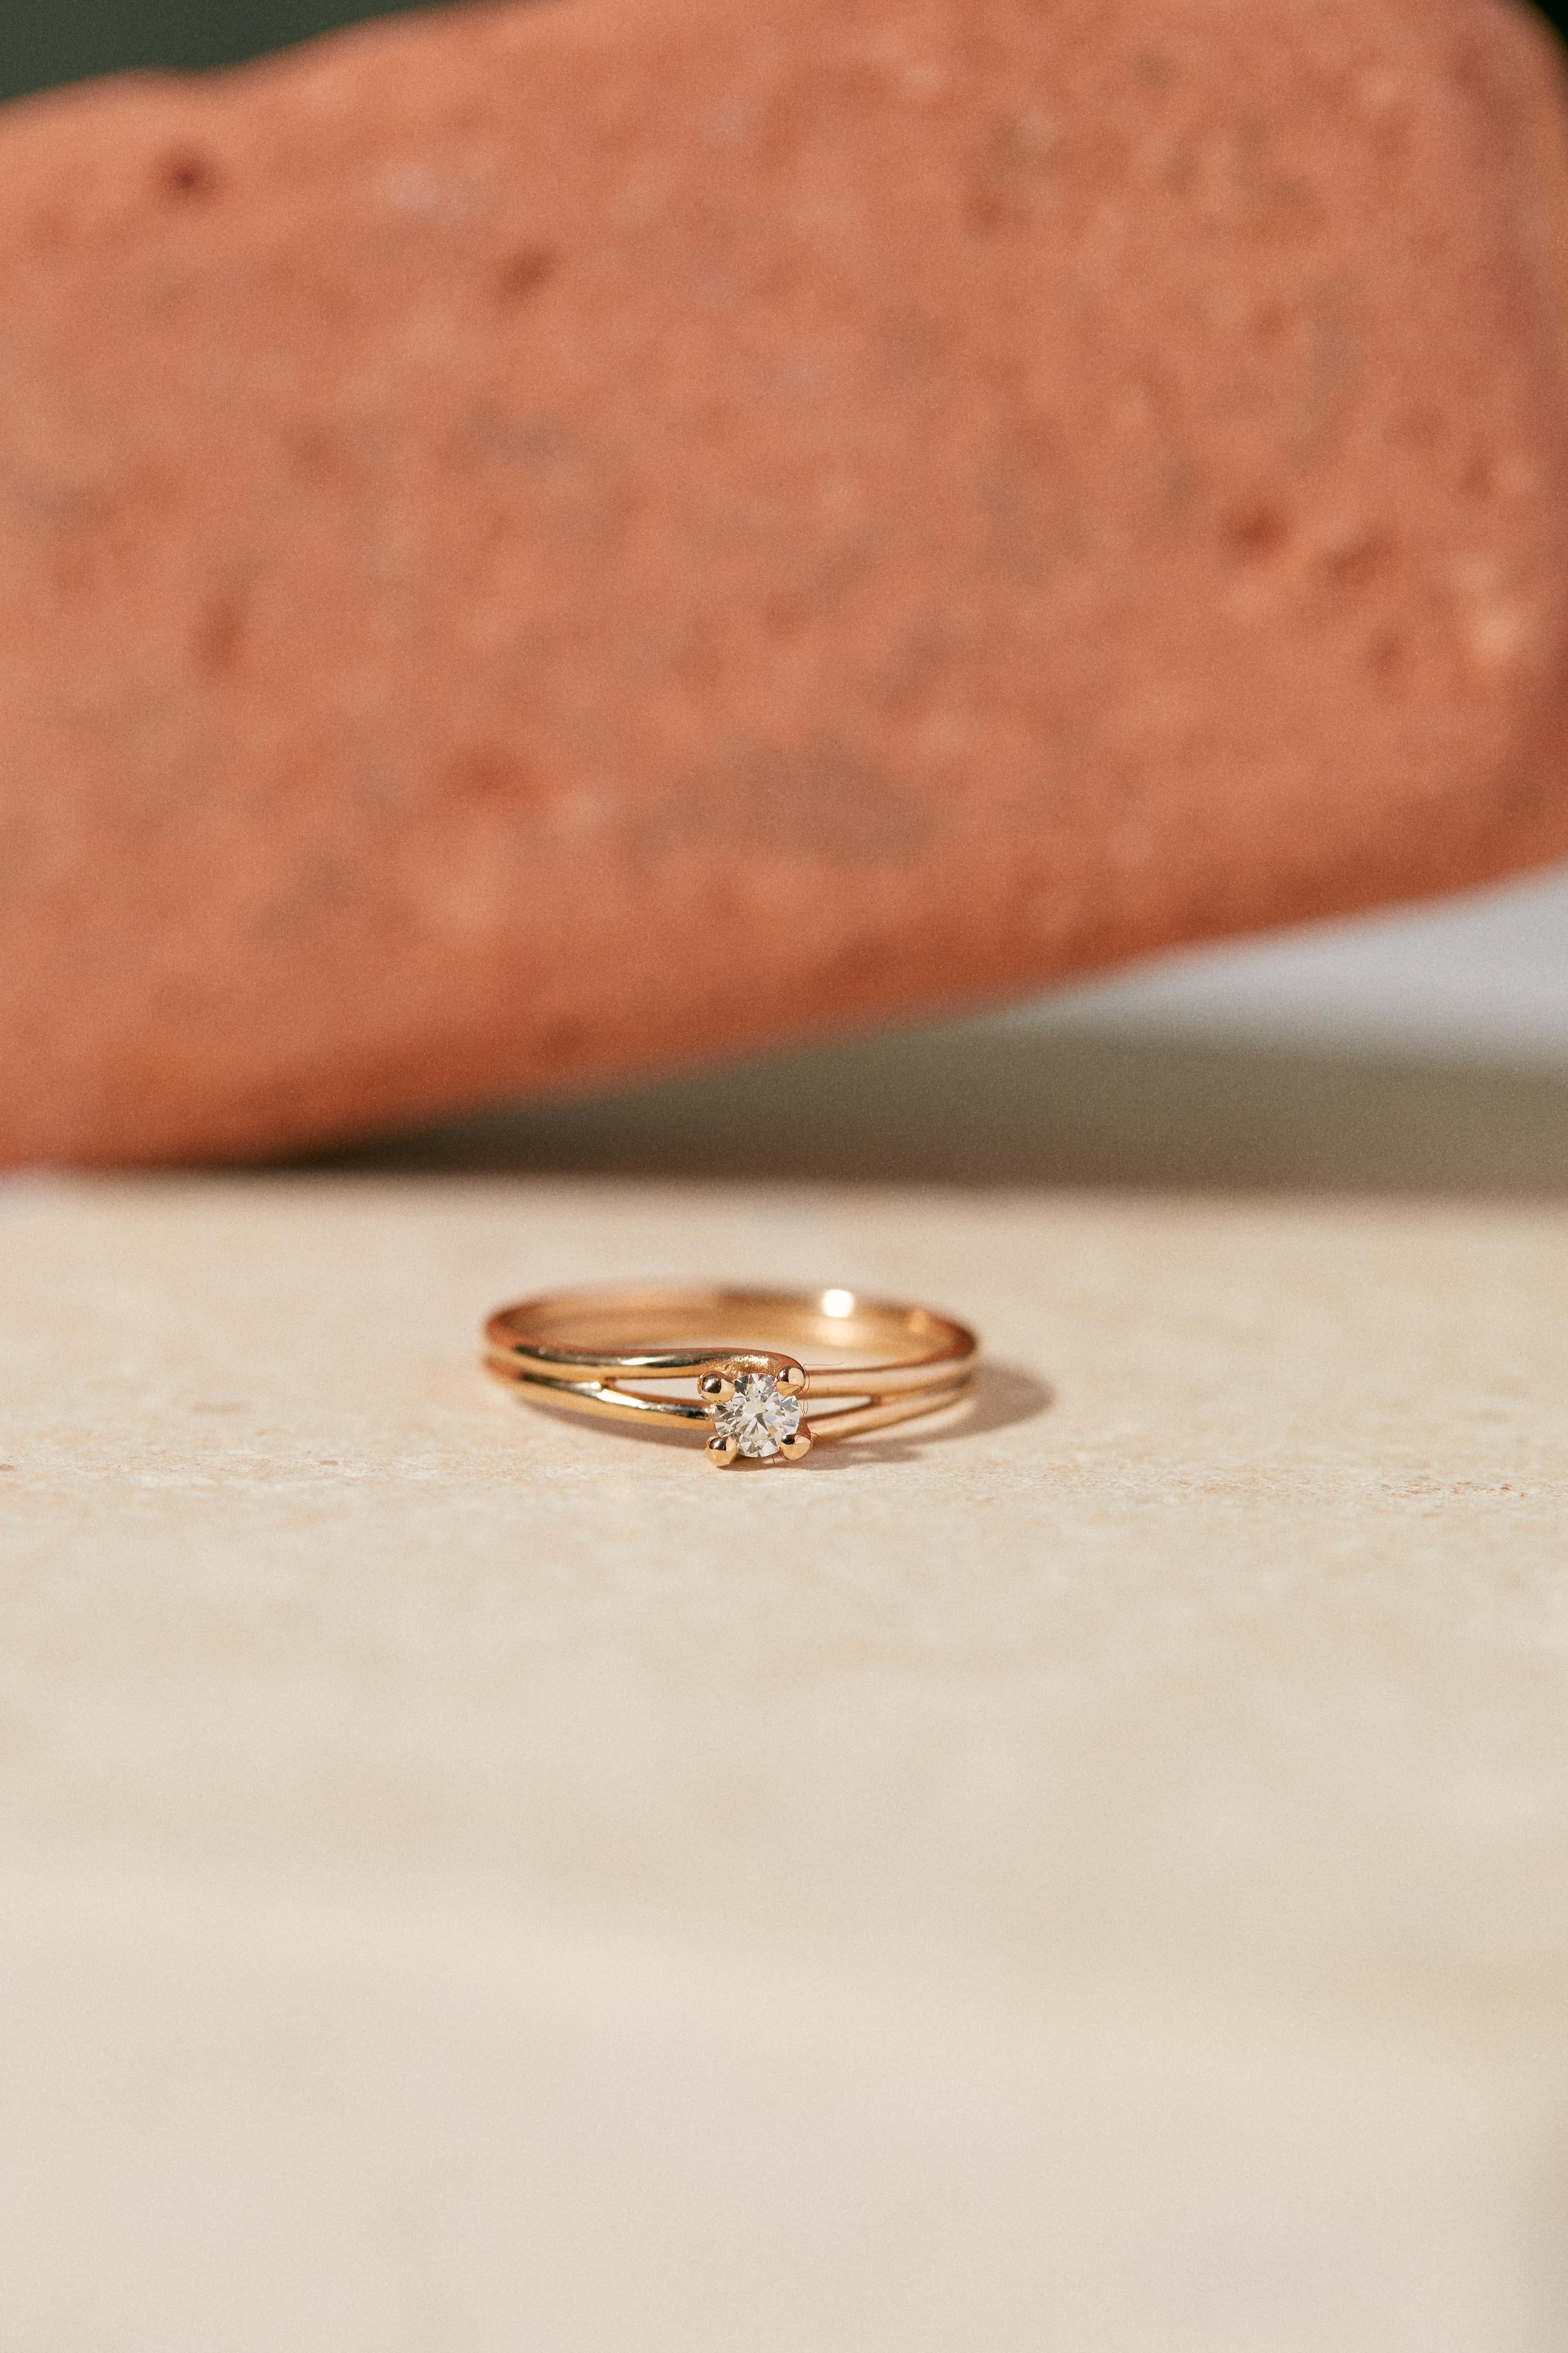 The Aristote ring has that artisanal purity of big pieces: its solitary diamond supported by 4 prongs punctuates the embrace of two crossed golden threads. Ravishing. The Aristote ring is in 18 karat yellow gold and handmade in Paris.

Time of